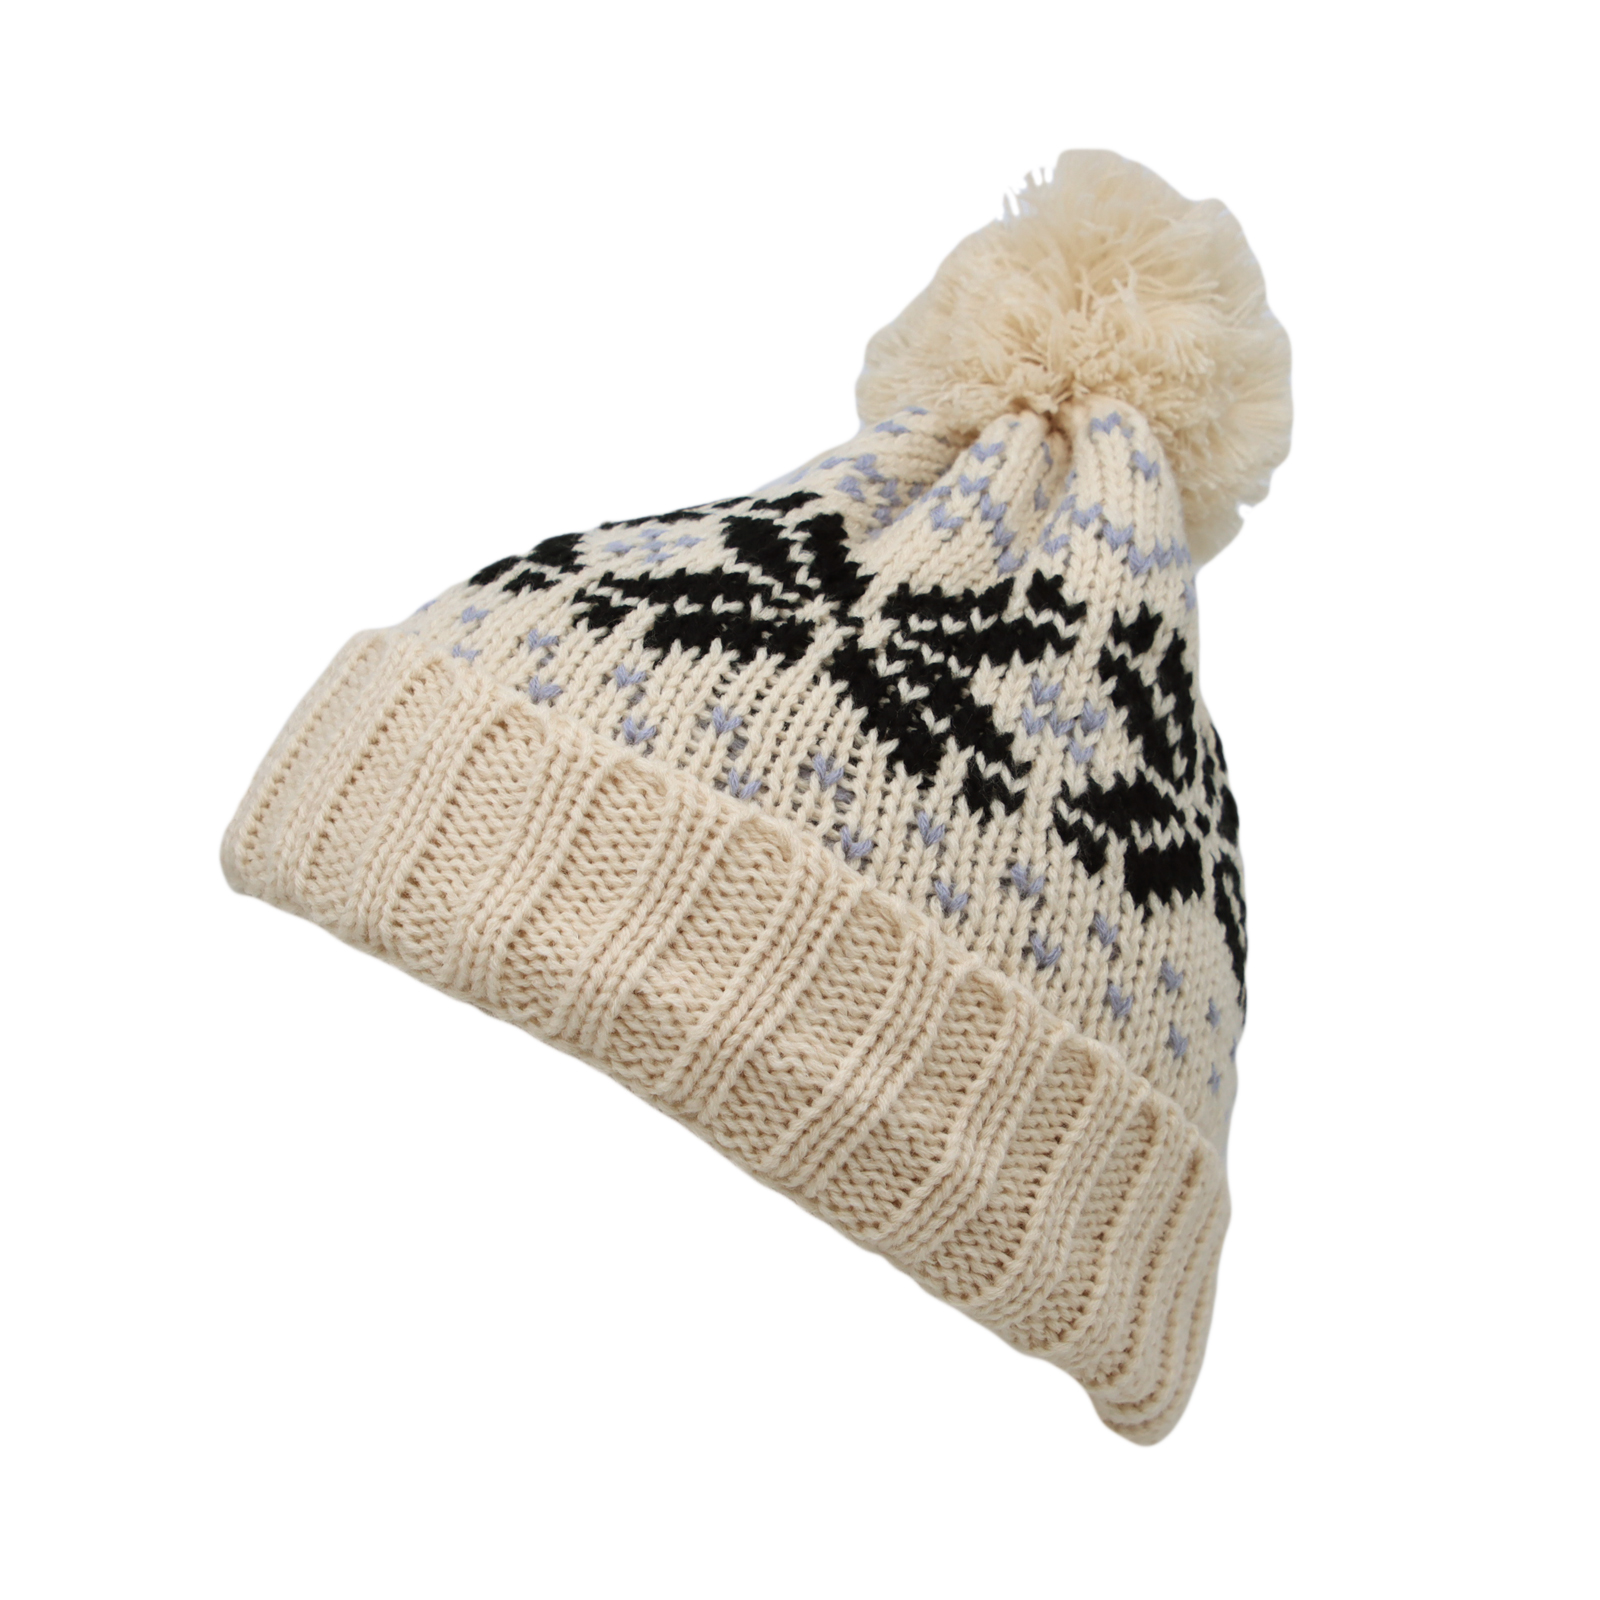 WITHMOONS Knit Fairs Isle Nordic Bobble Pom Beanie Hat JZP0026